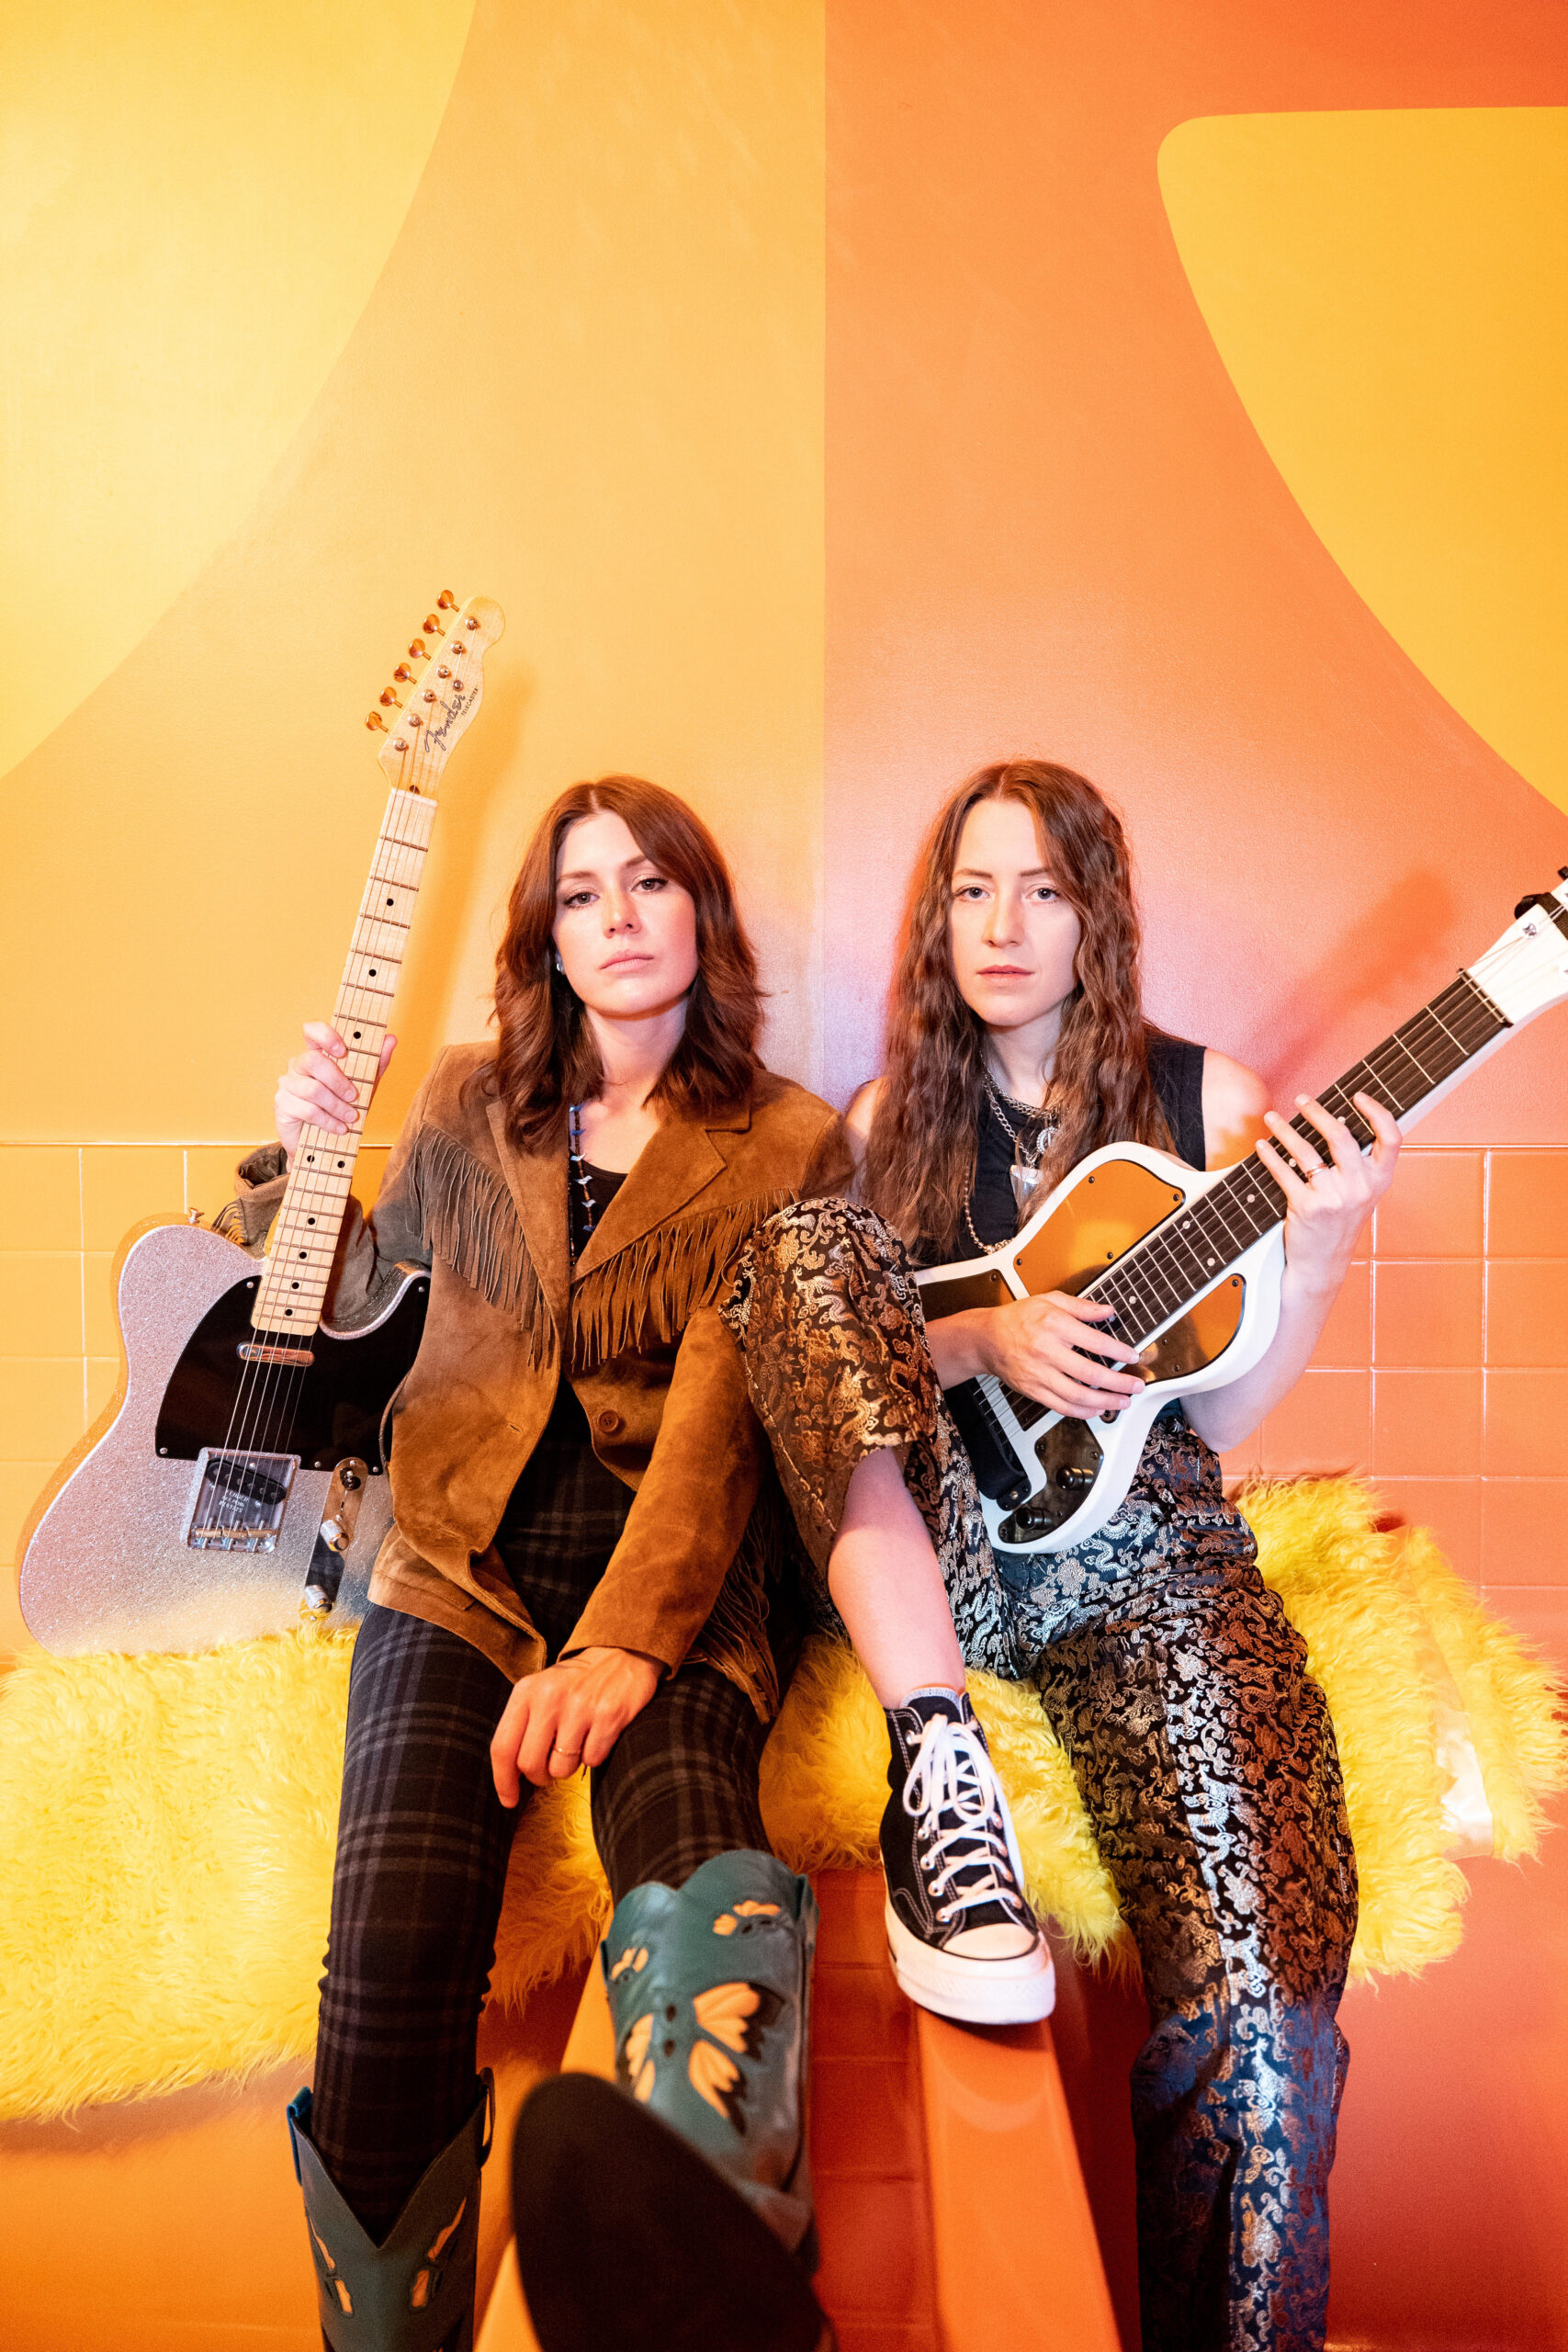 Promotional image of the duo Rebecca and Megan Lovell of Larkin Poe. Two women are facing the camera and holding instruments. The women on the left is holding a light pink guitar with glitter and wearing a brown fringe western jacket. The woman on the right is holding an instrument and wearing a black sleeveless shirt with shiny patterned pants. Both women are sitting on a fuzzy yellow blanket in front of a colorful orange and yellow background. 